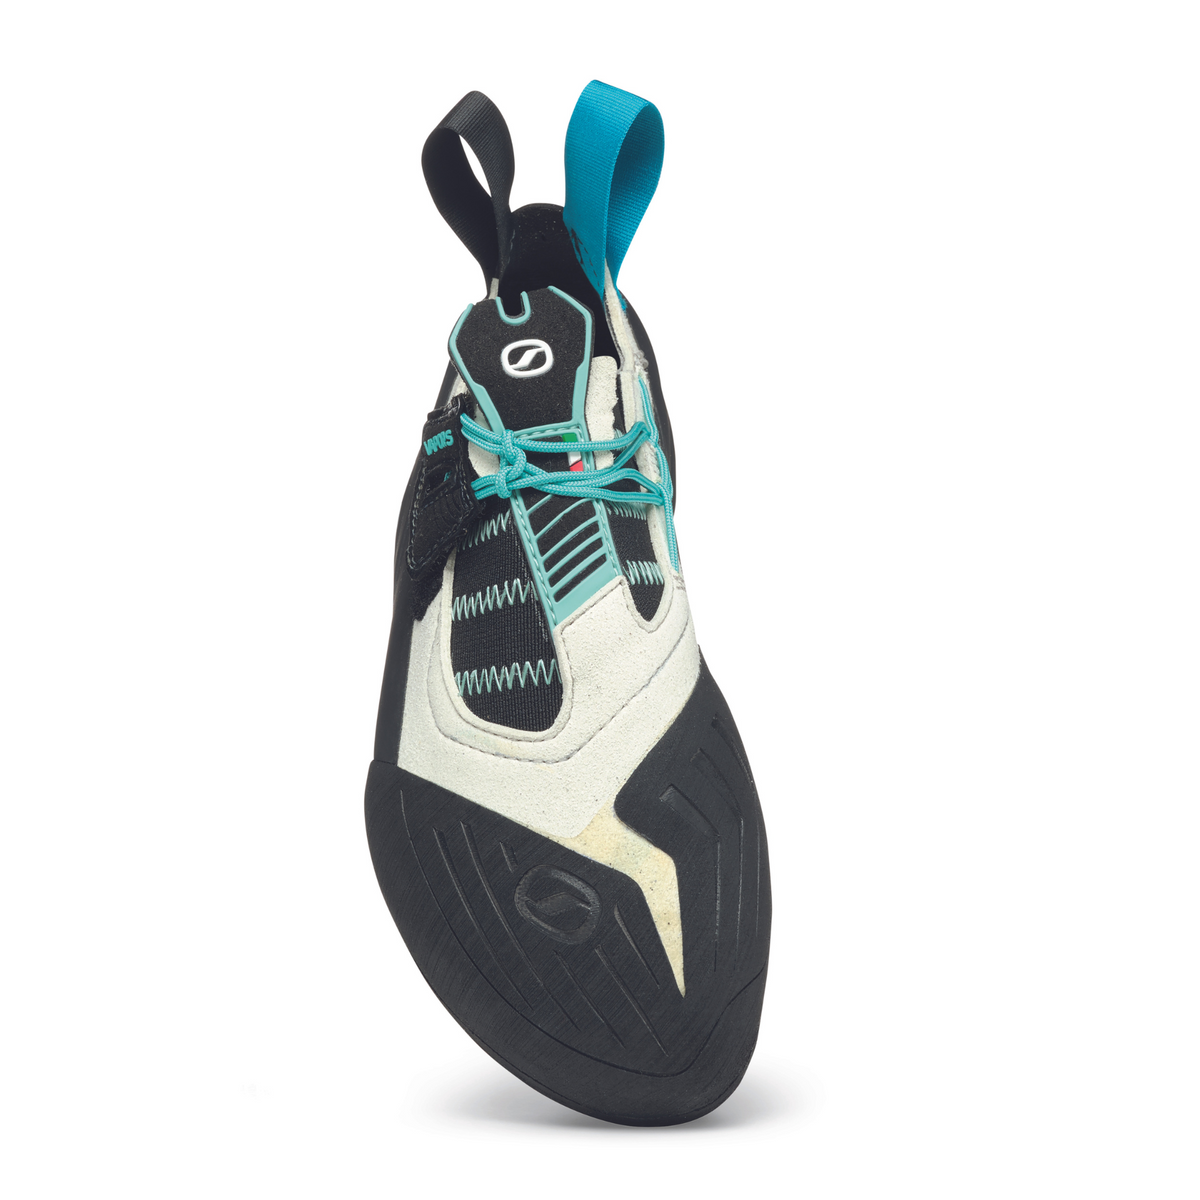 Scarpa Vapour S Womens in Dust Grey-Aqua. front view showing toe rubber and removable strap